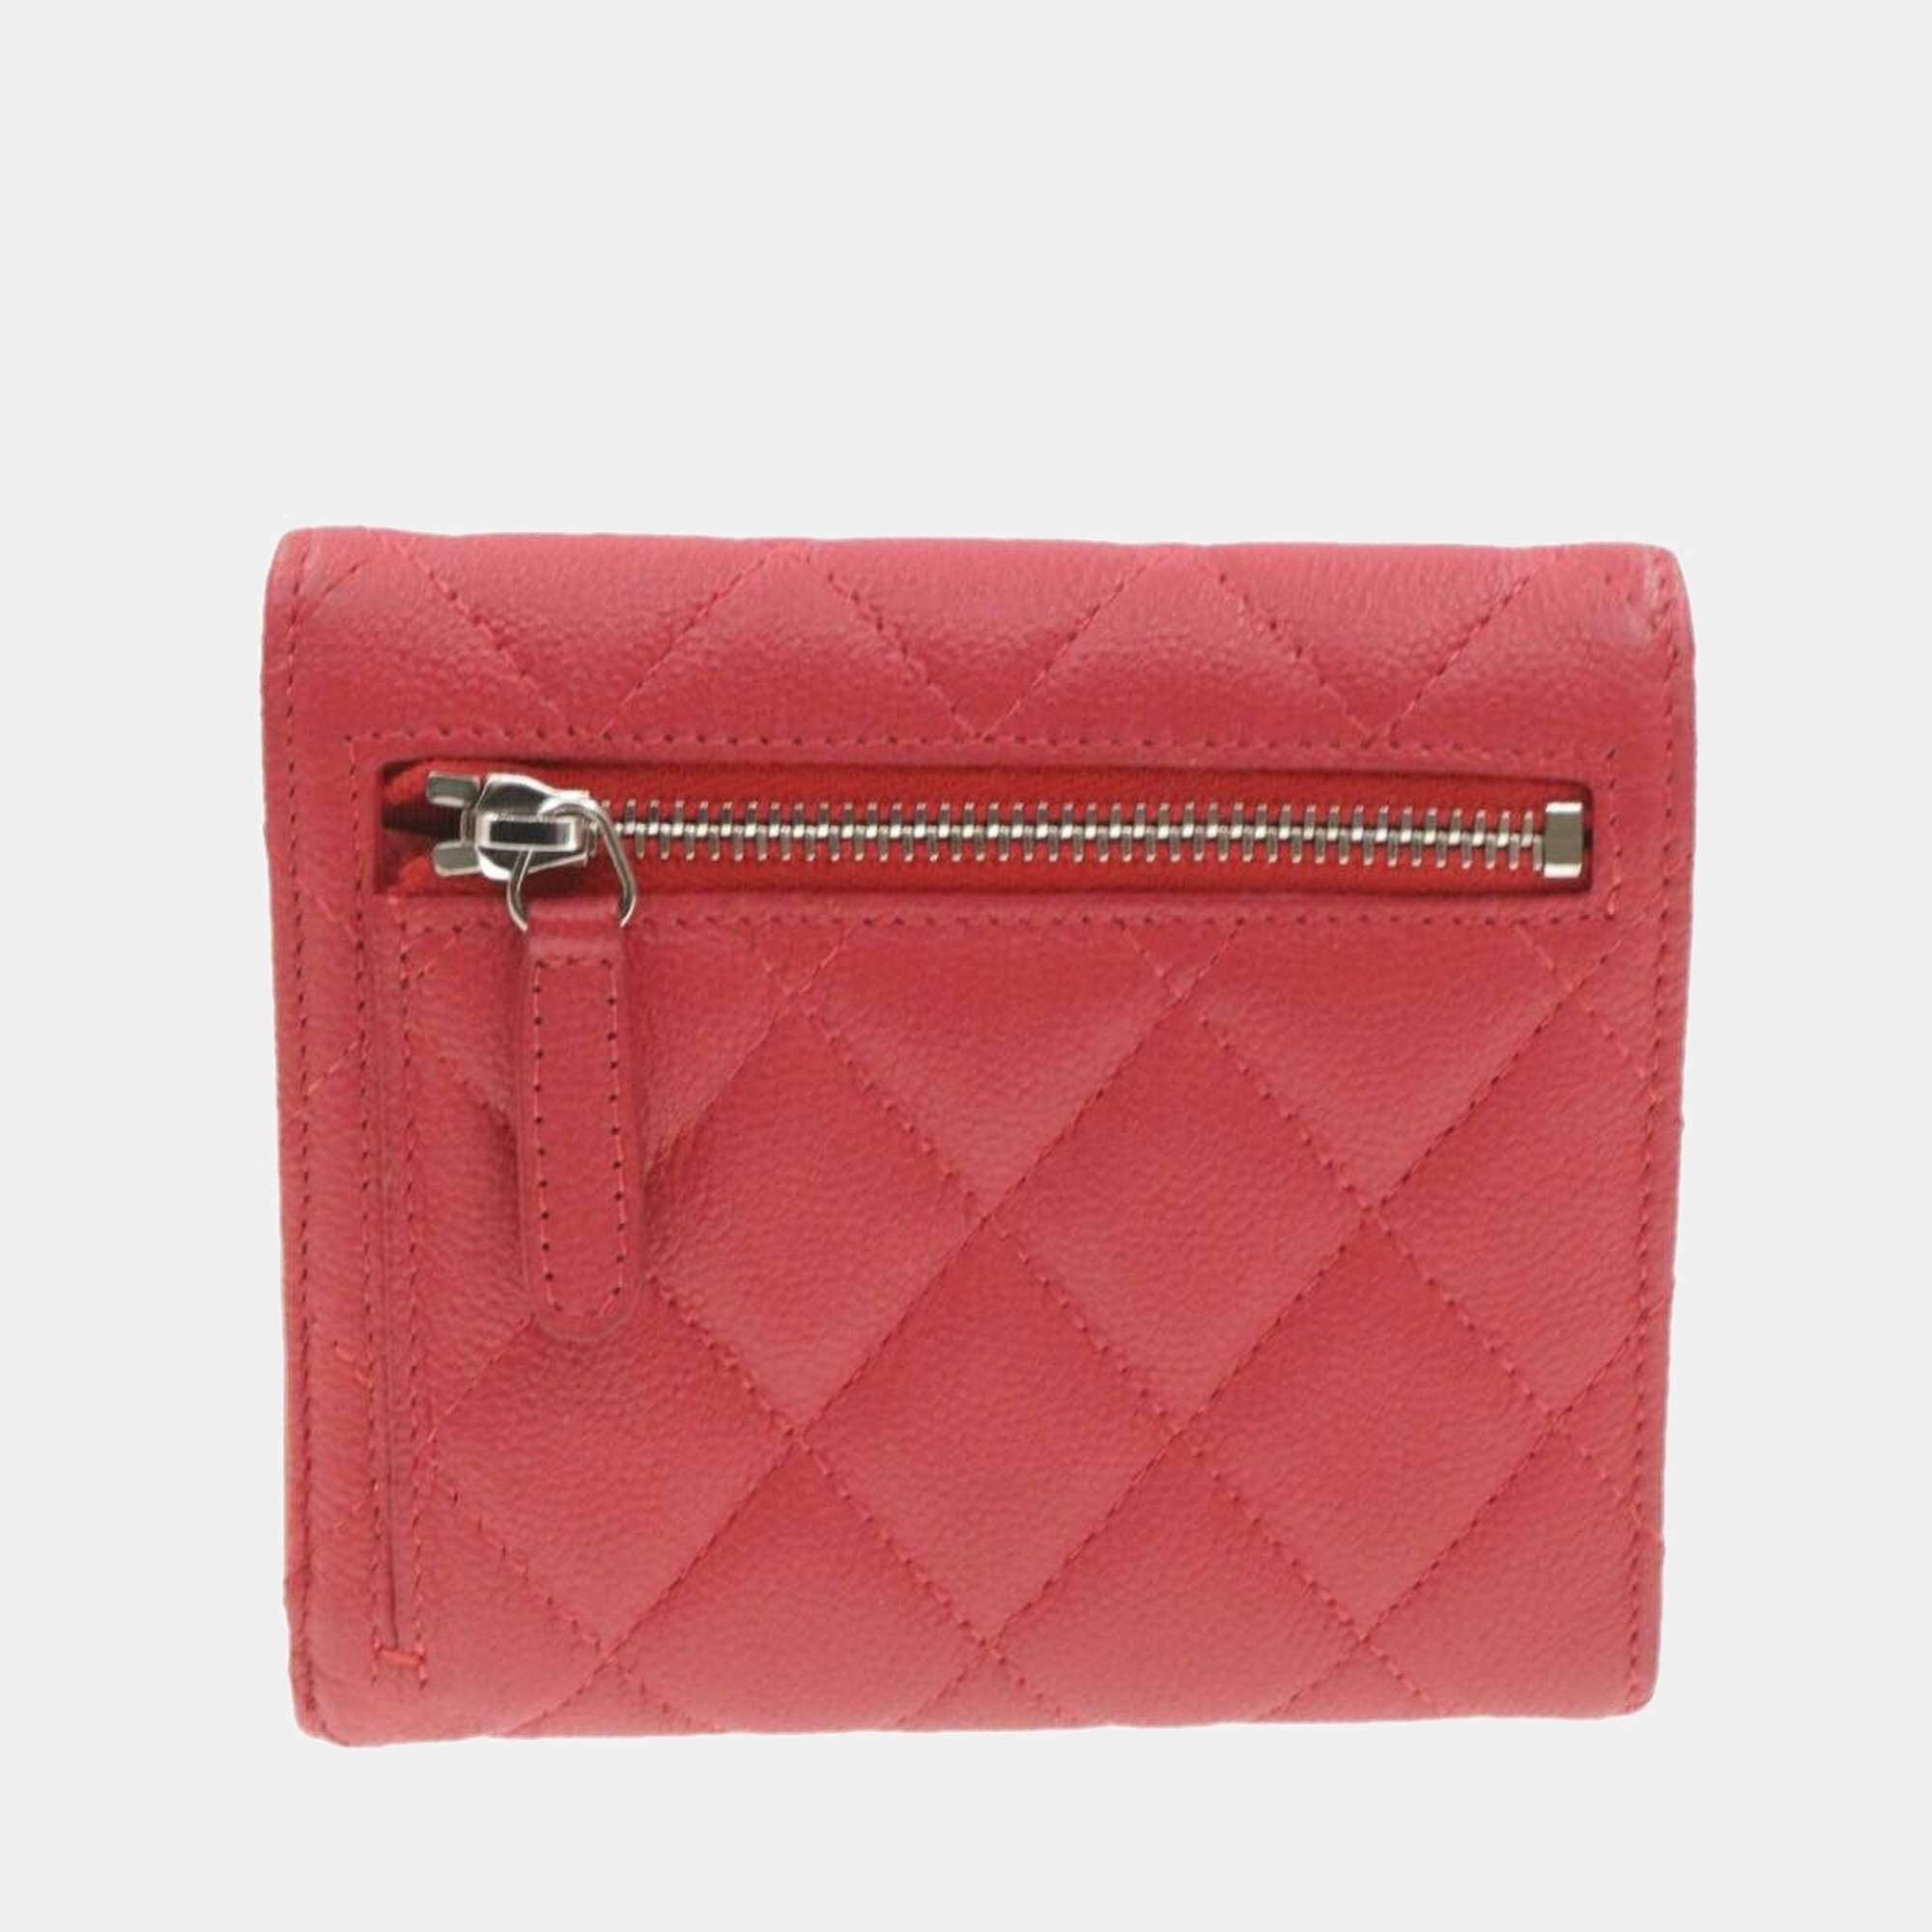 Chanel Pink Caviar Leather flap Wallet Chanel